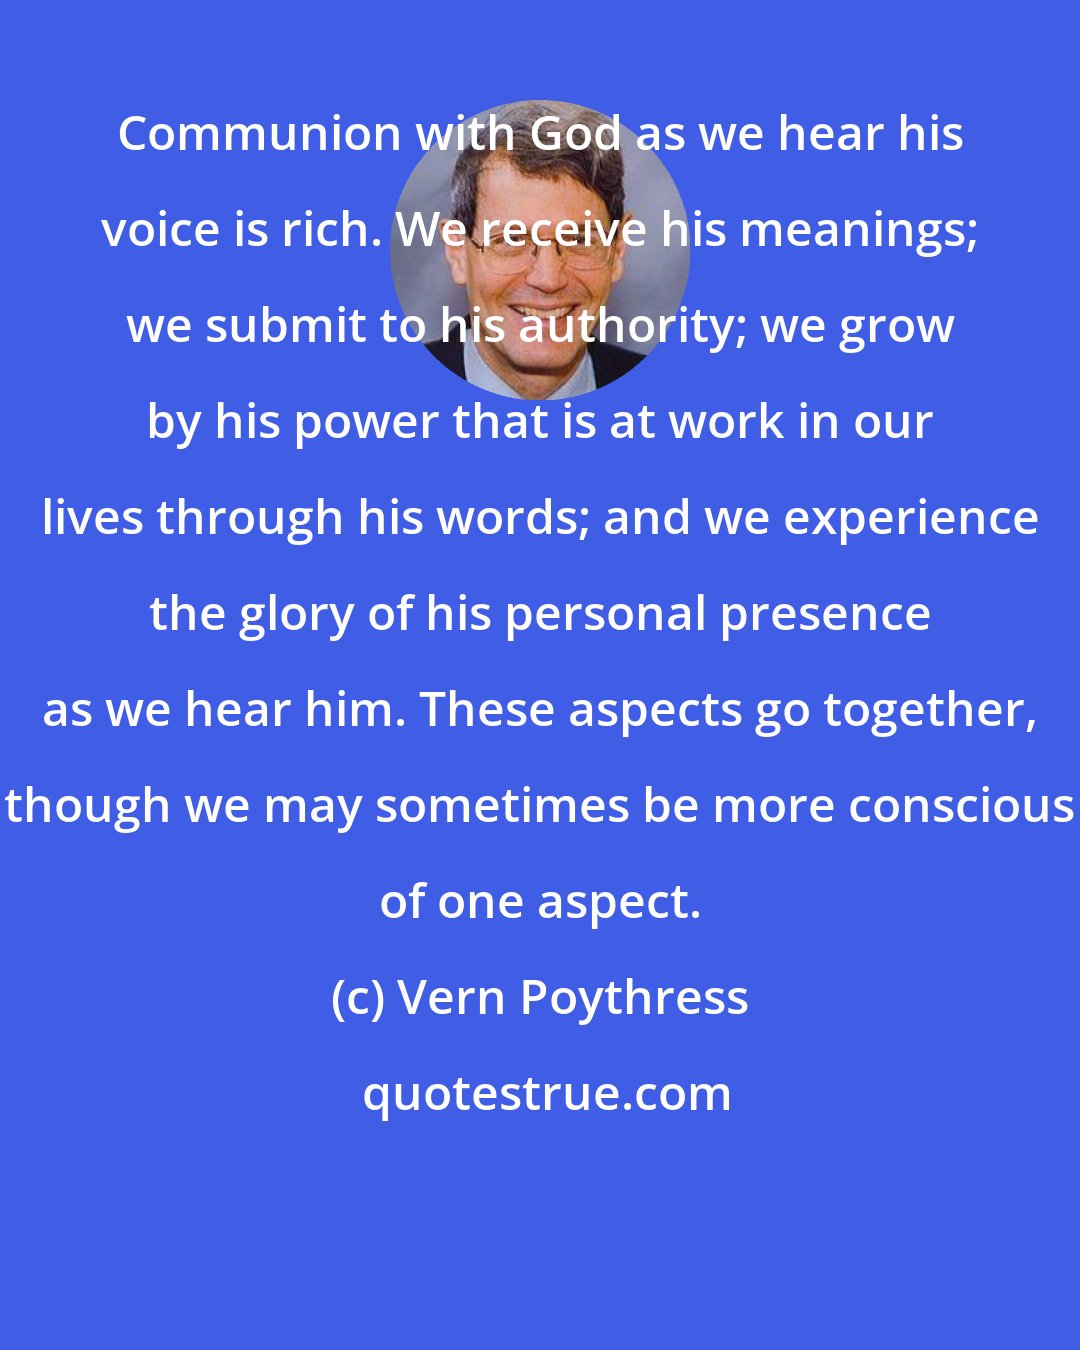 Vern Poythress: Communion with God as we hear his voice is rich. We receive his meanings; we submit to his authority; we grow by his power that is at work in our lives through his words; and we experience the glory of his personal presence as we hear him. These aspects go together, though we may sometimes be more conscious of one aspect.